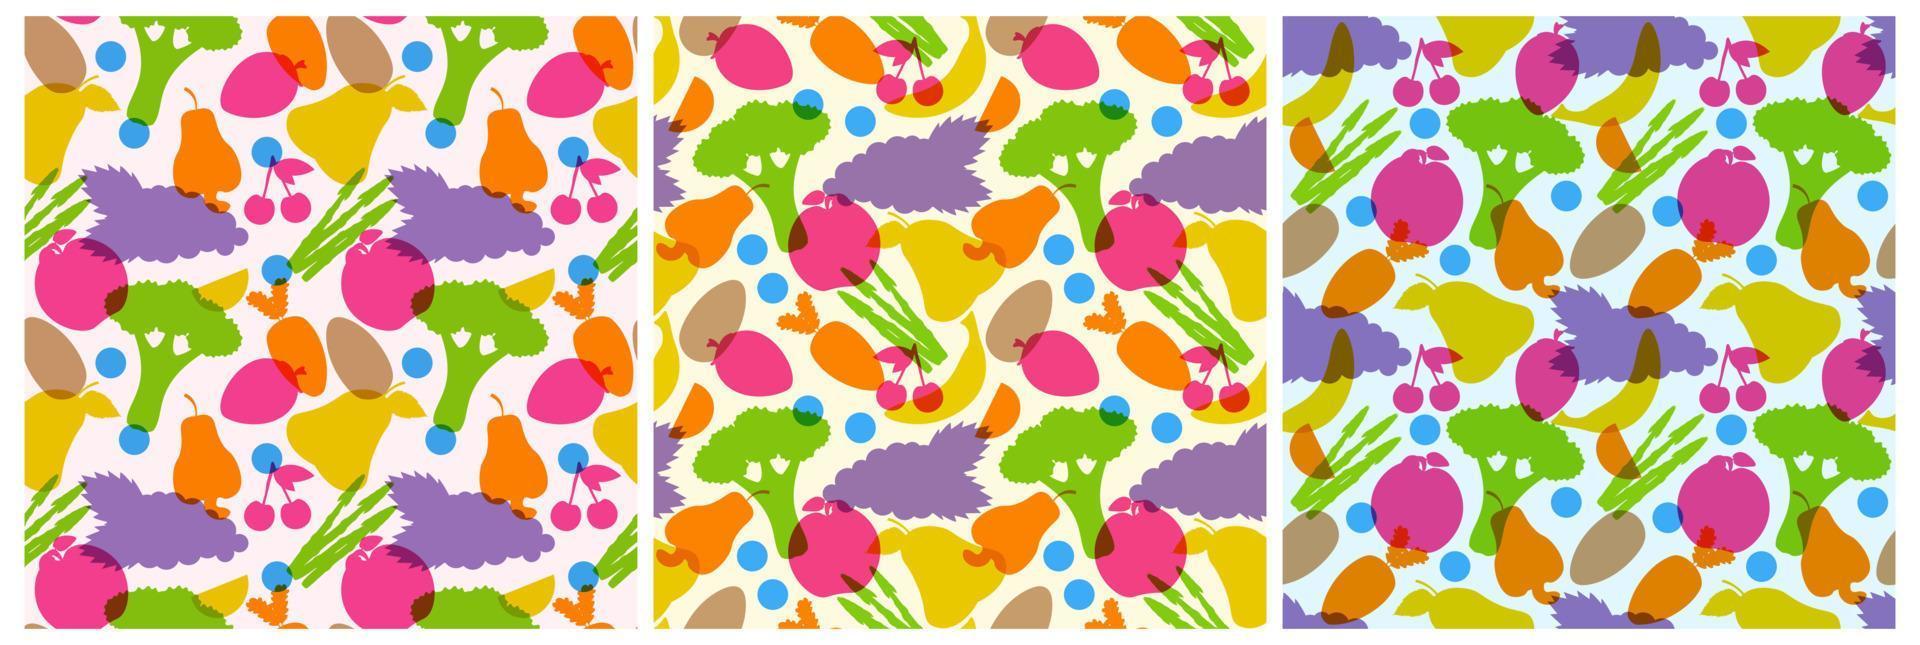 Set of Vegetarian, Fruit or Vegetables Seamless Pattern Design with Fresh, Organic and Natural Food in Hand Drawn Flat Cartoon Background Illustration vector